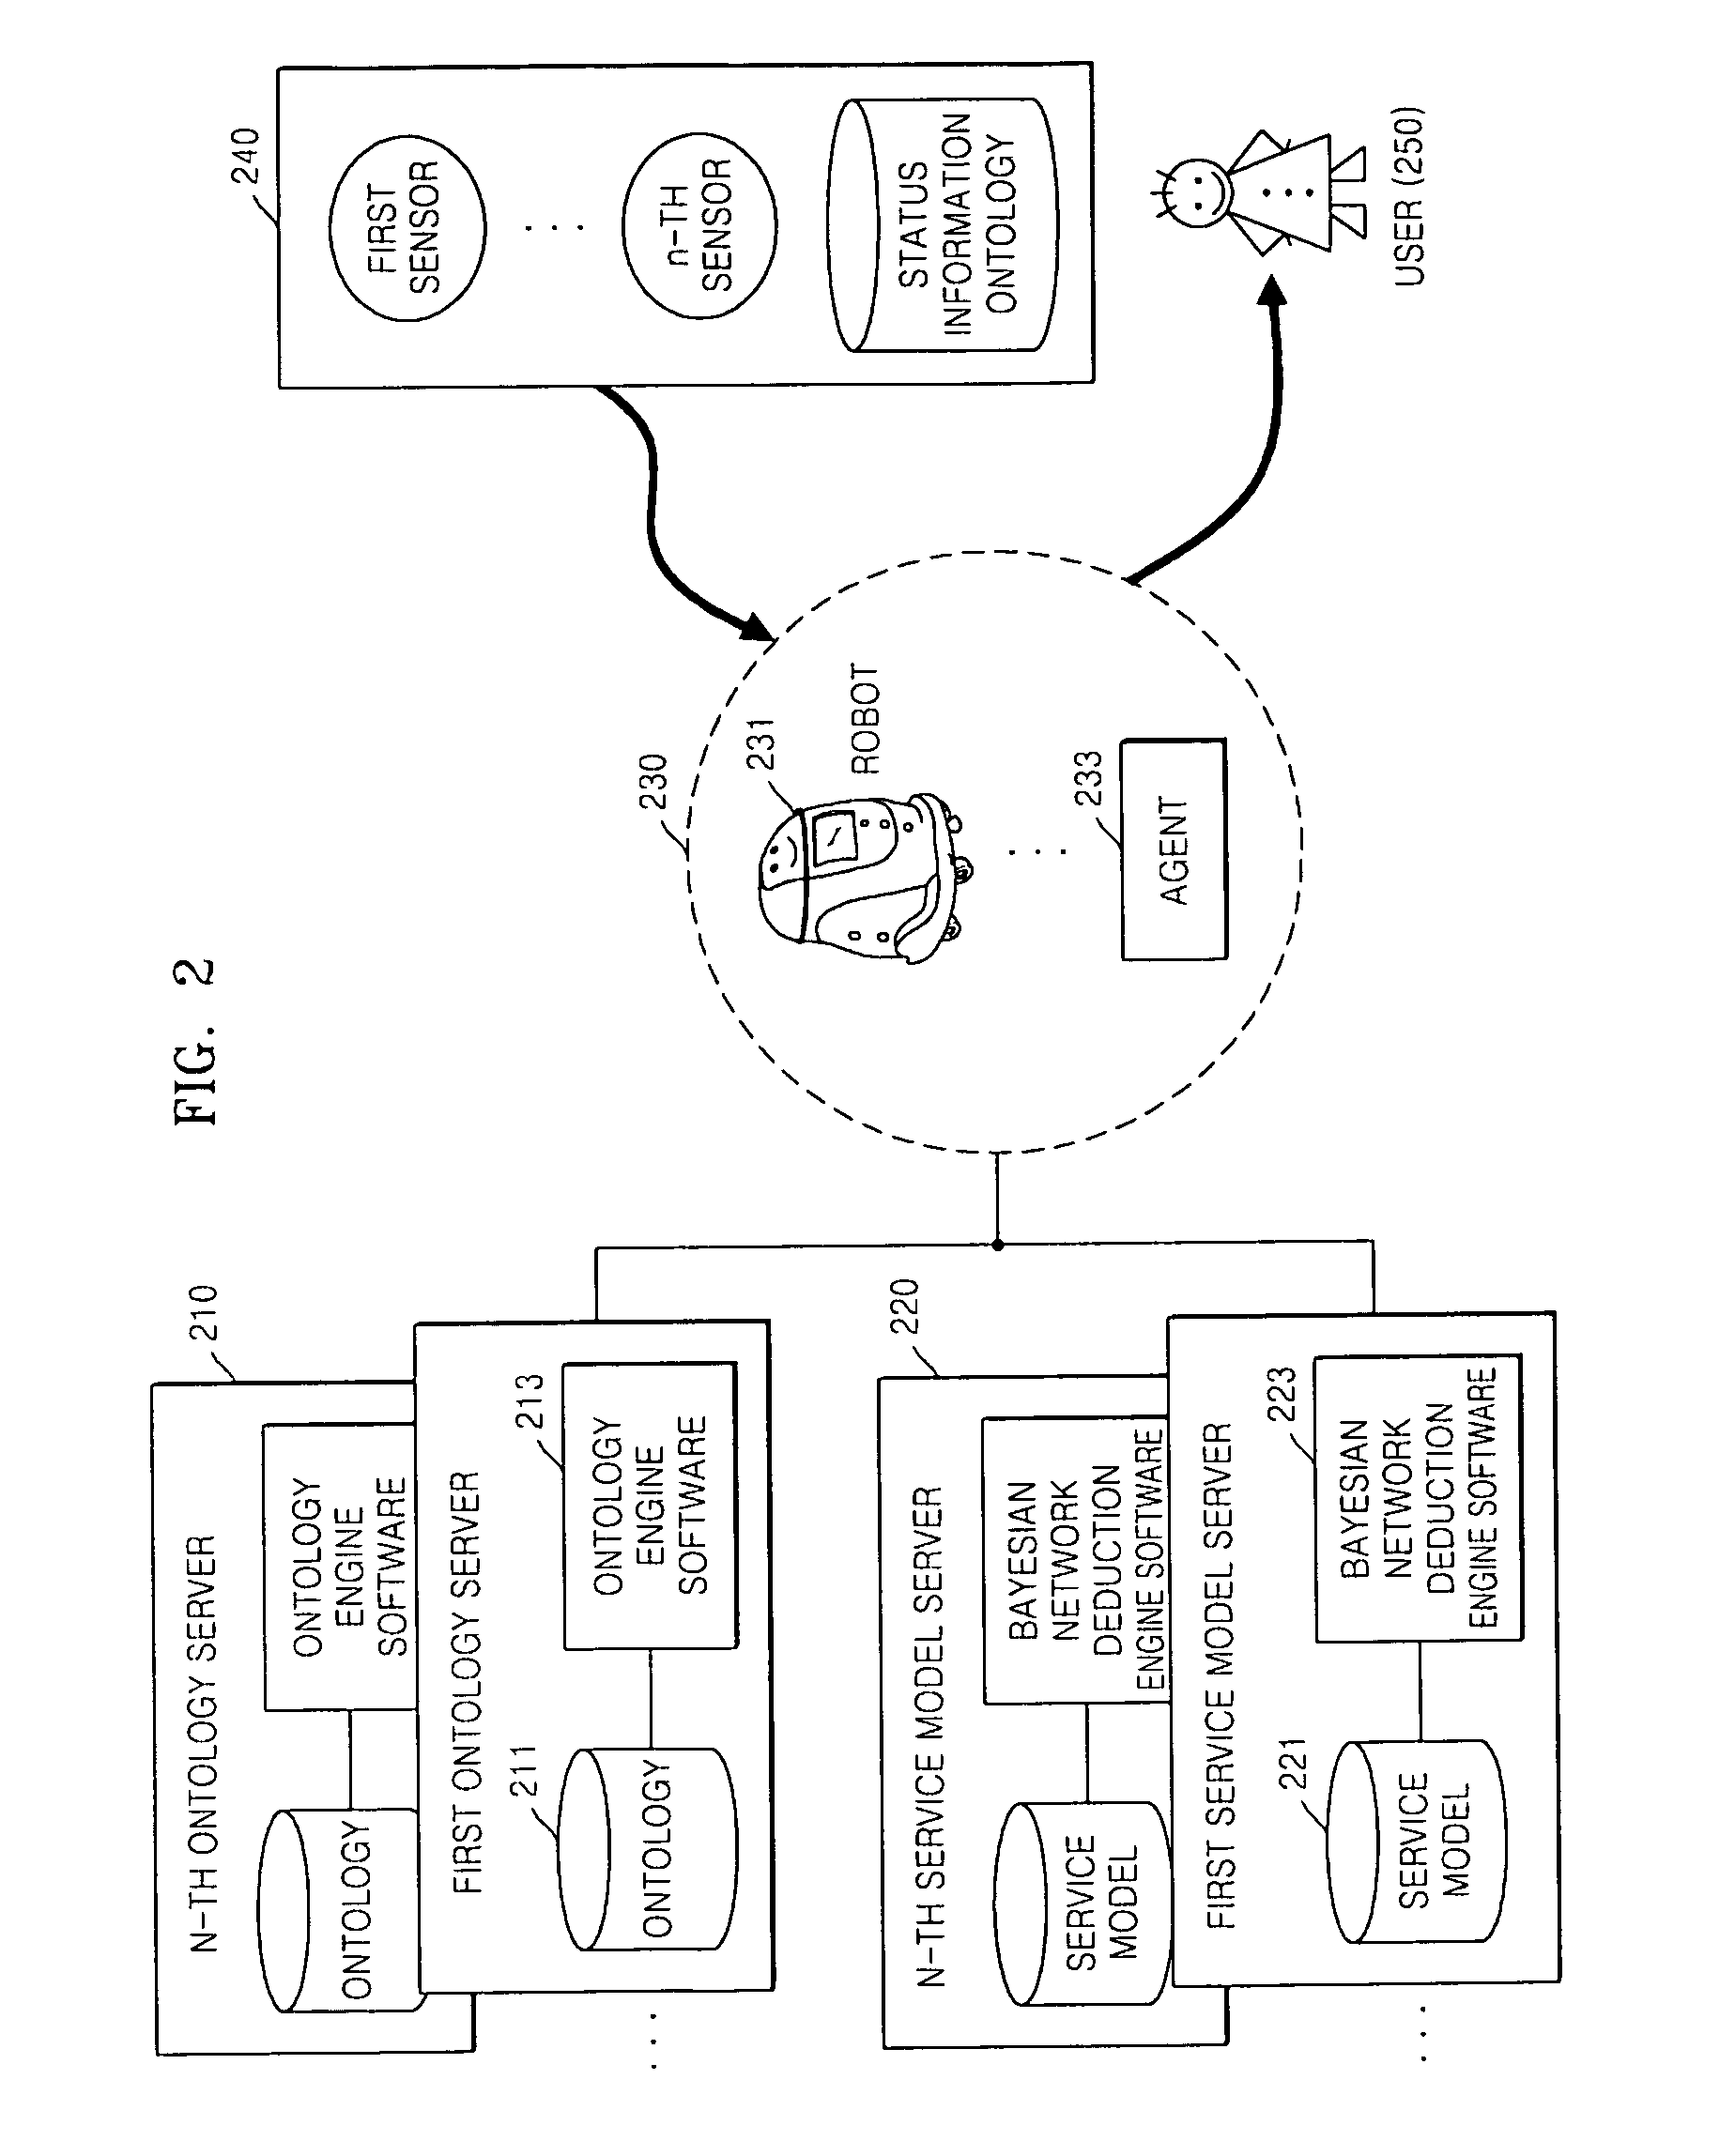 Method and system for modeling service using bayesian network and status information in distributed environment